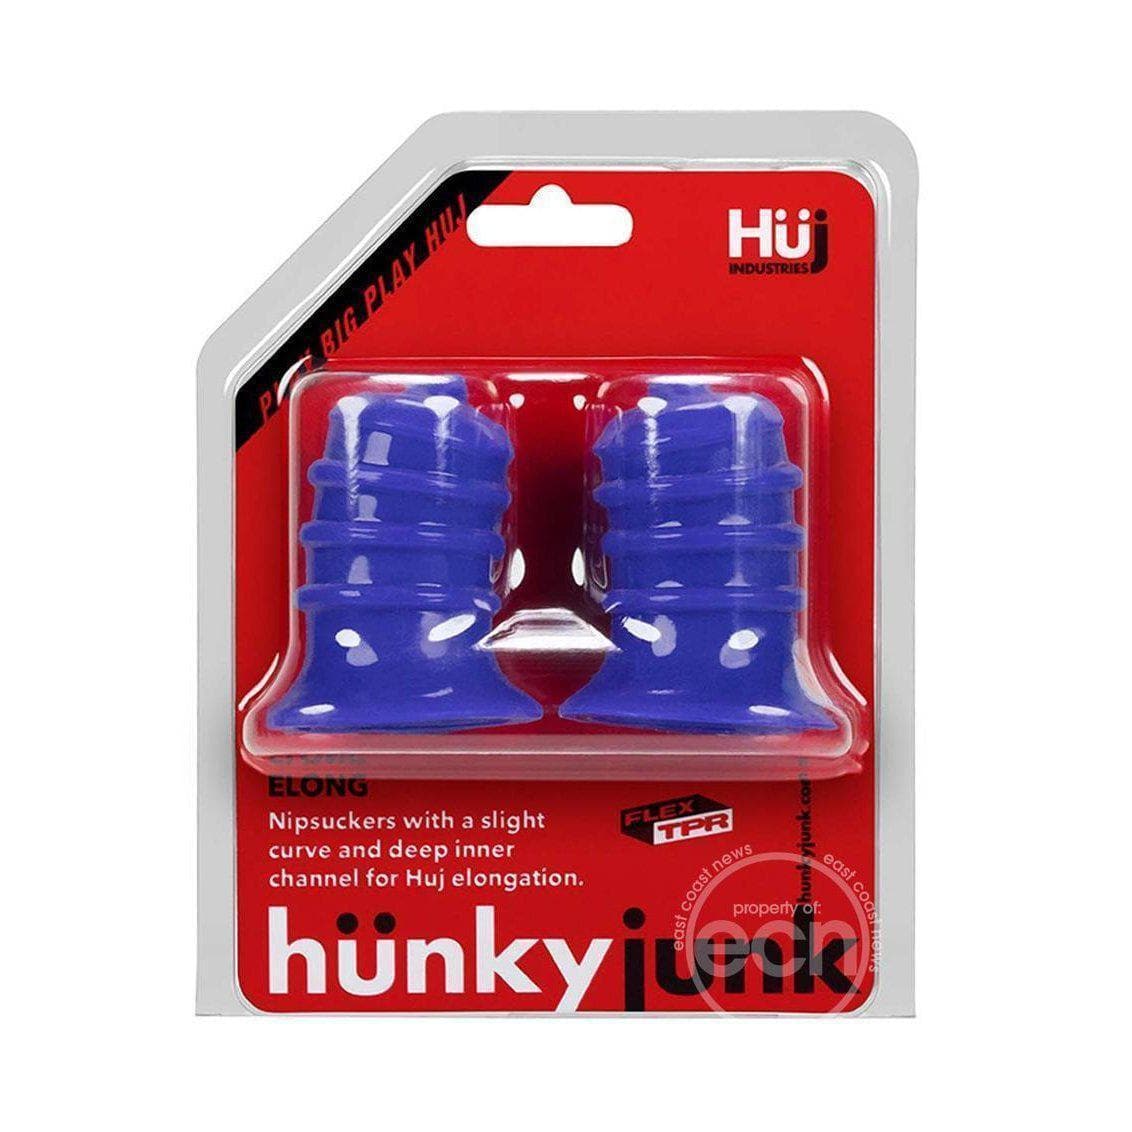 Hunkyjunk Elong Curved Nipsuckers with 4 Springy Rings for Him and Her - Romantic Blessings